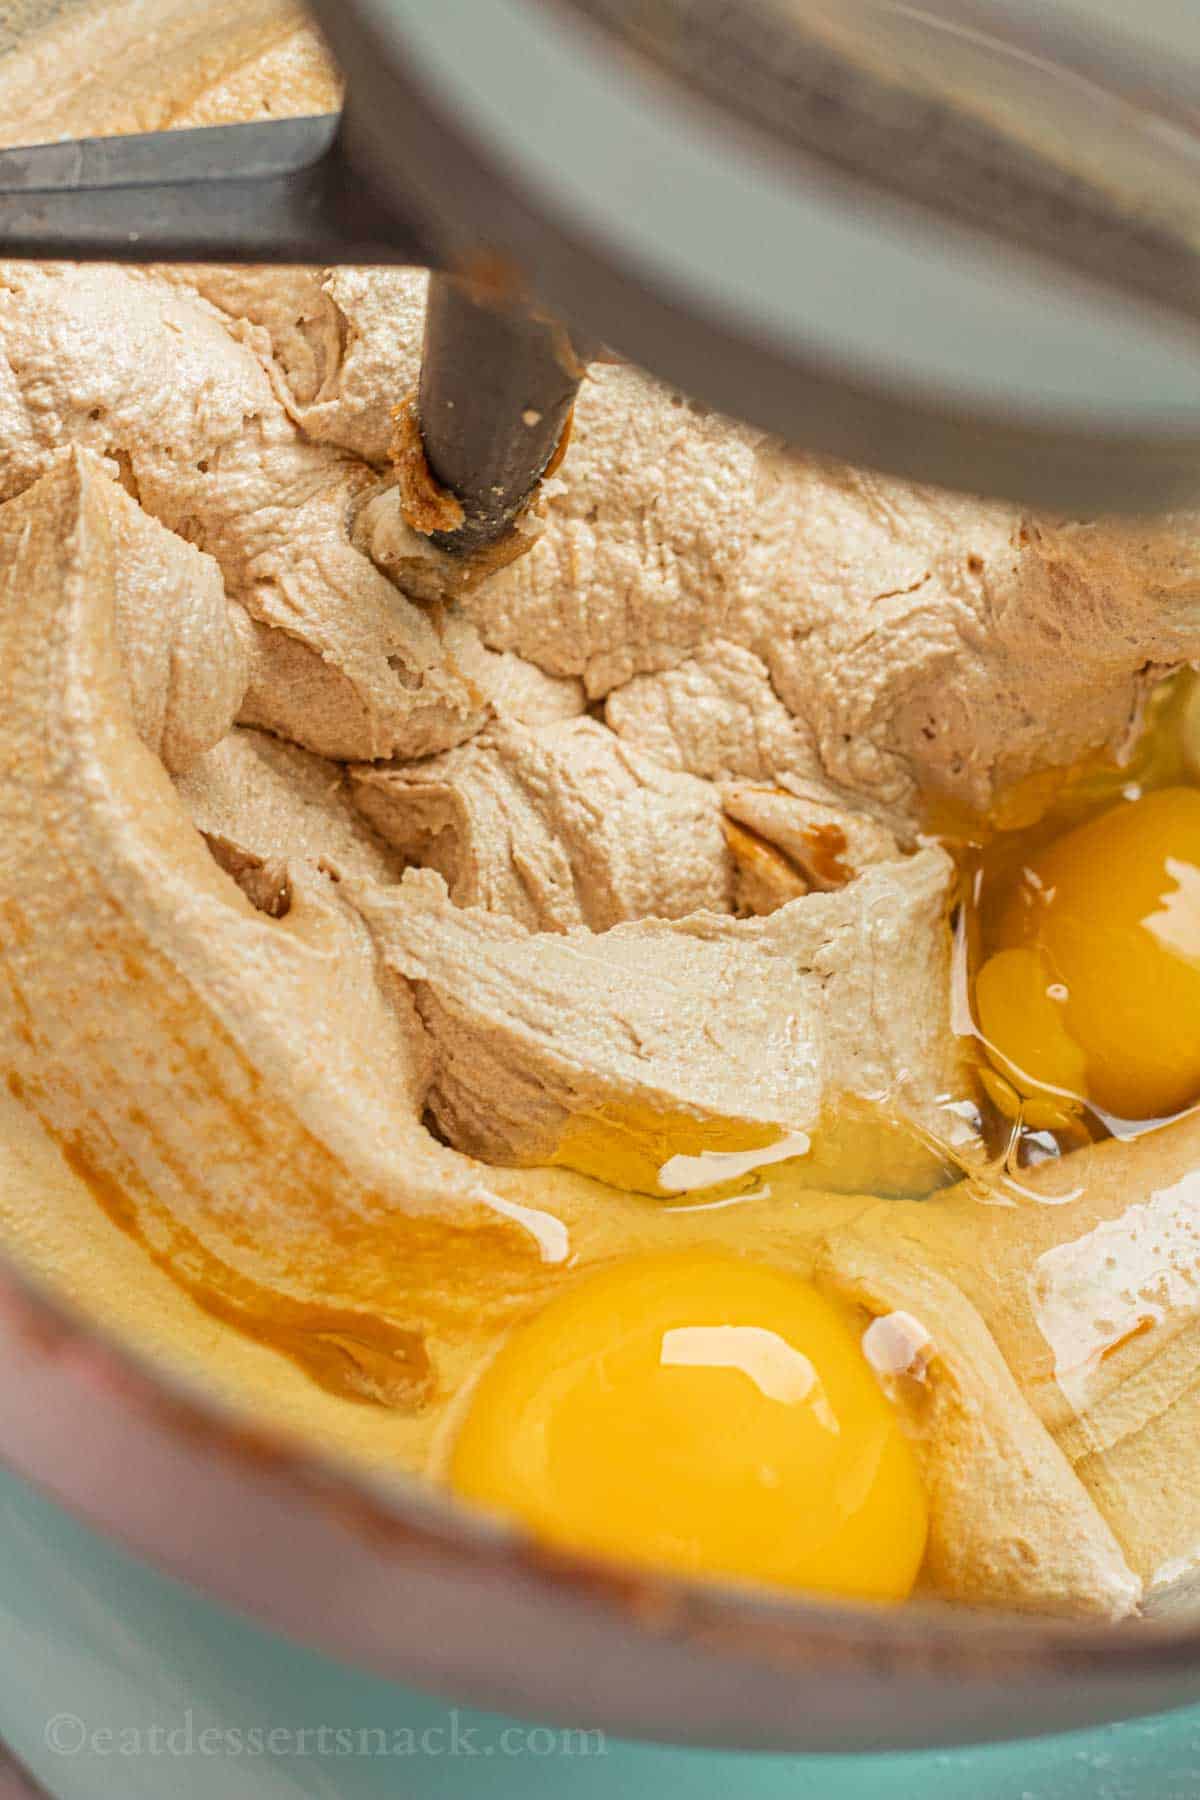 Raw eggs in sugar and butter mixture for cookies in metal mixing bowl.